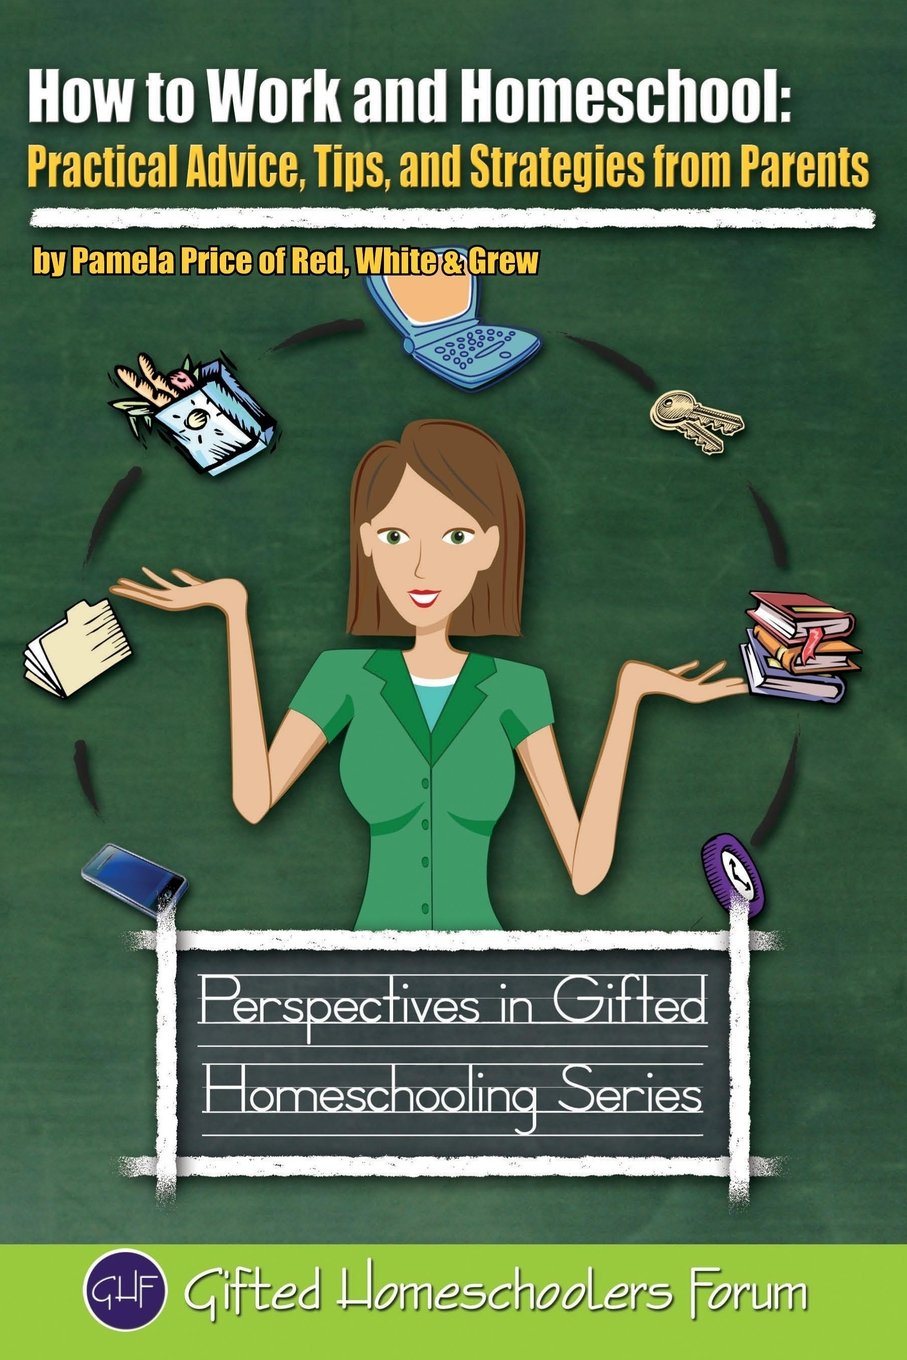 [Giveaway] "How to Work and Homeschool" by Pamela Price | San Antonio Charter Moms